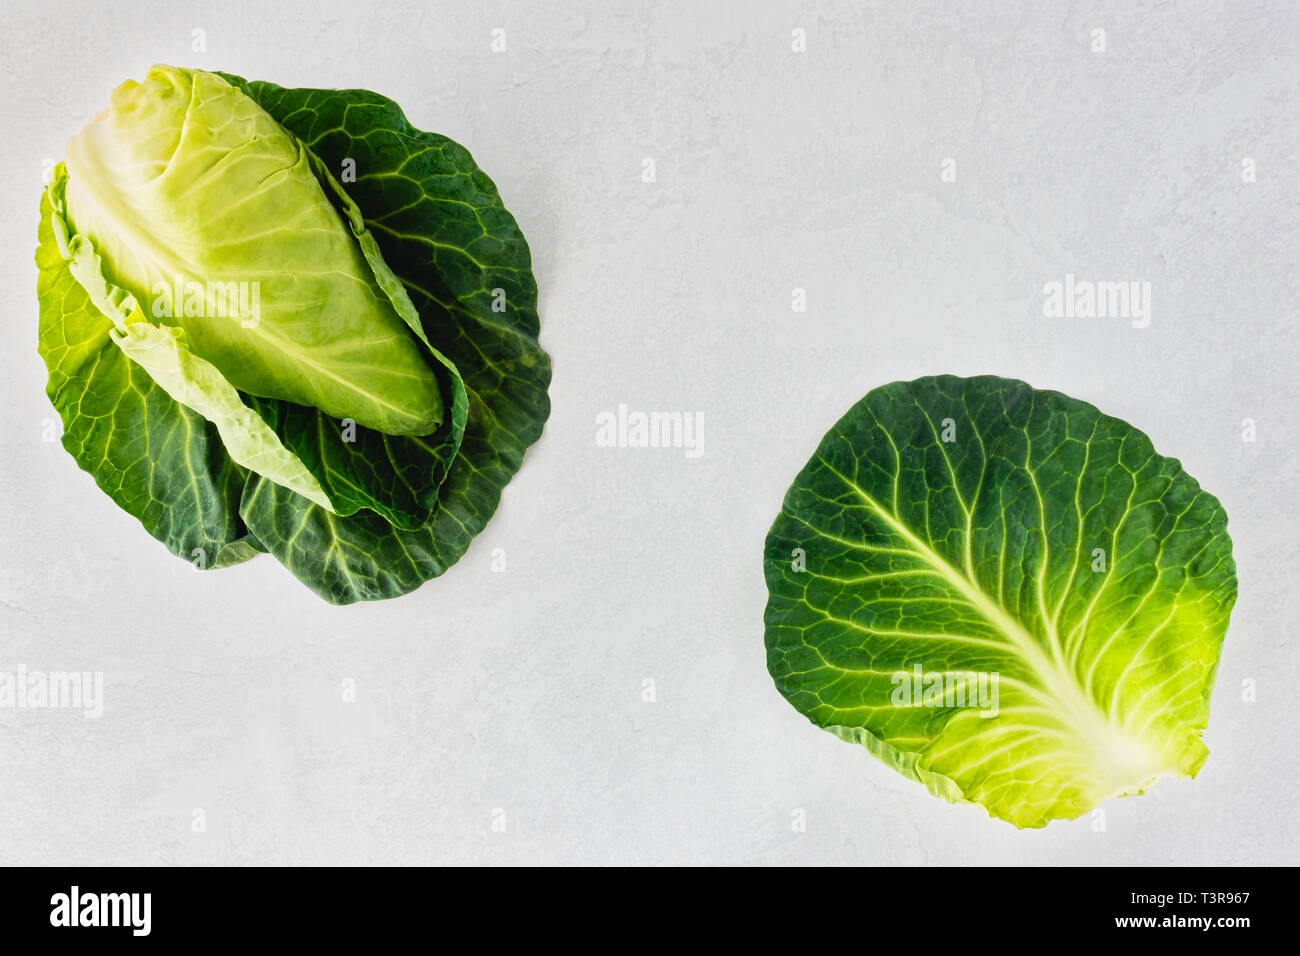 Whole pointed spring cabbage and leaf on gray patterned and textured background with copy space. Top view. Stock Photo